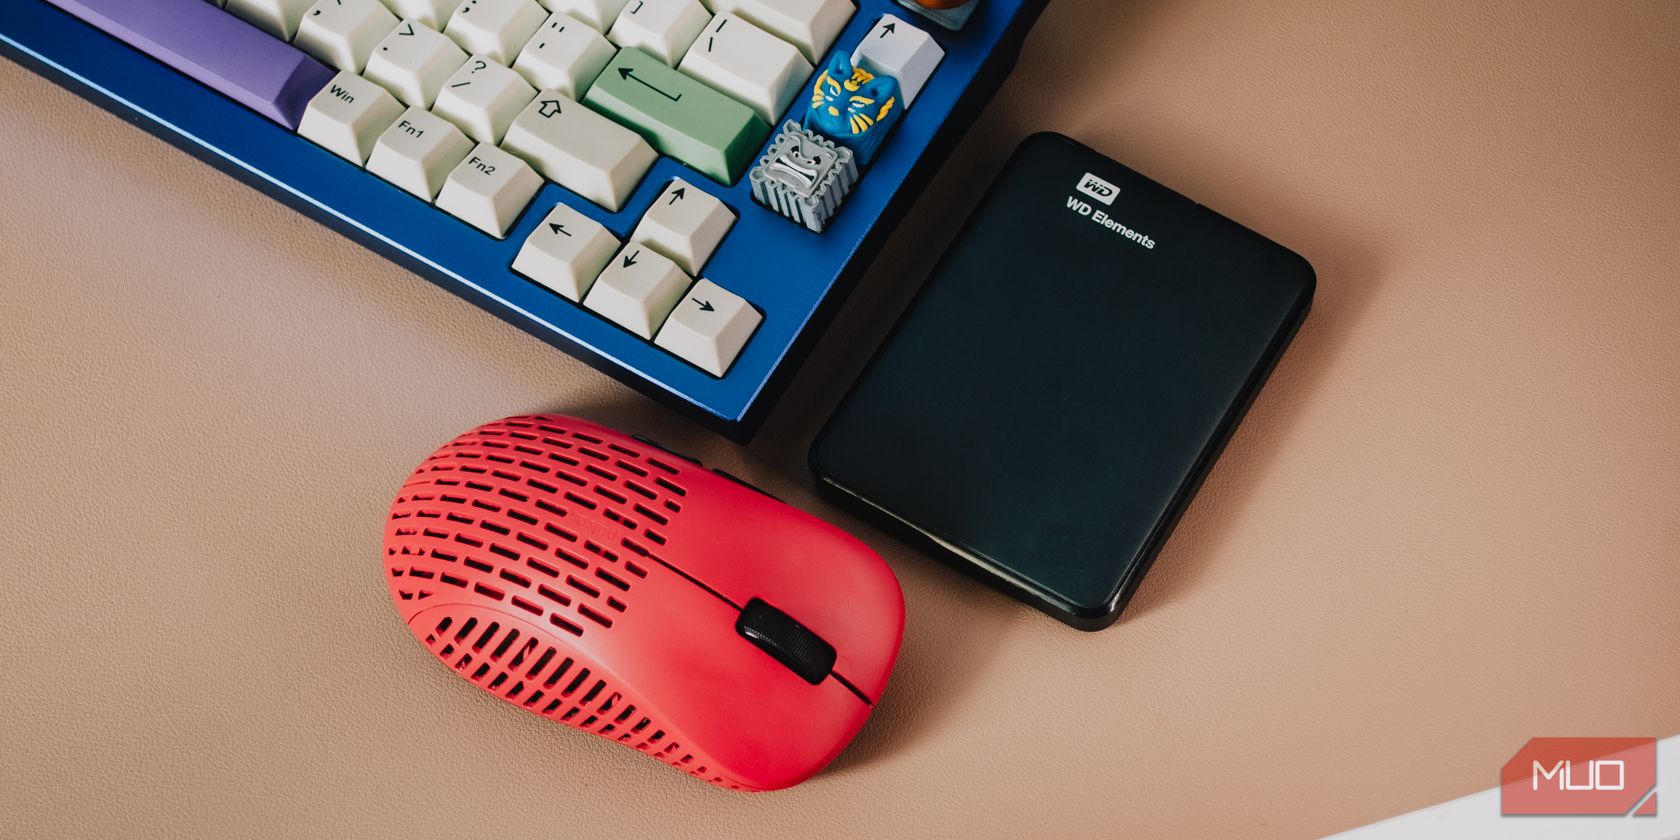 External hard drive next to mouse and keyboard